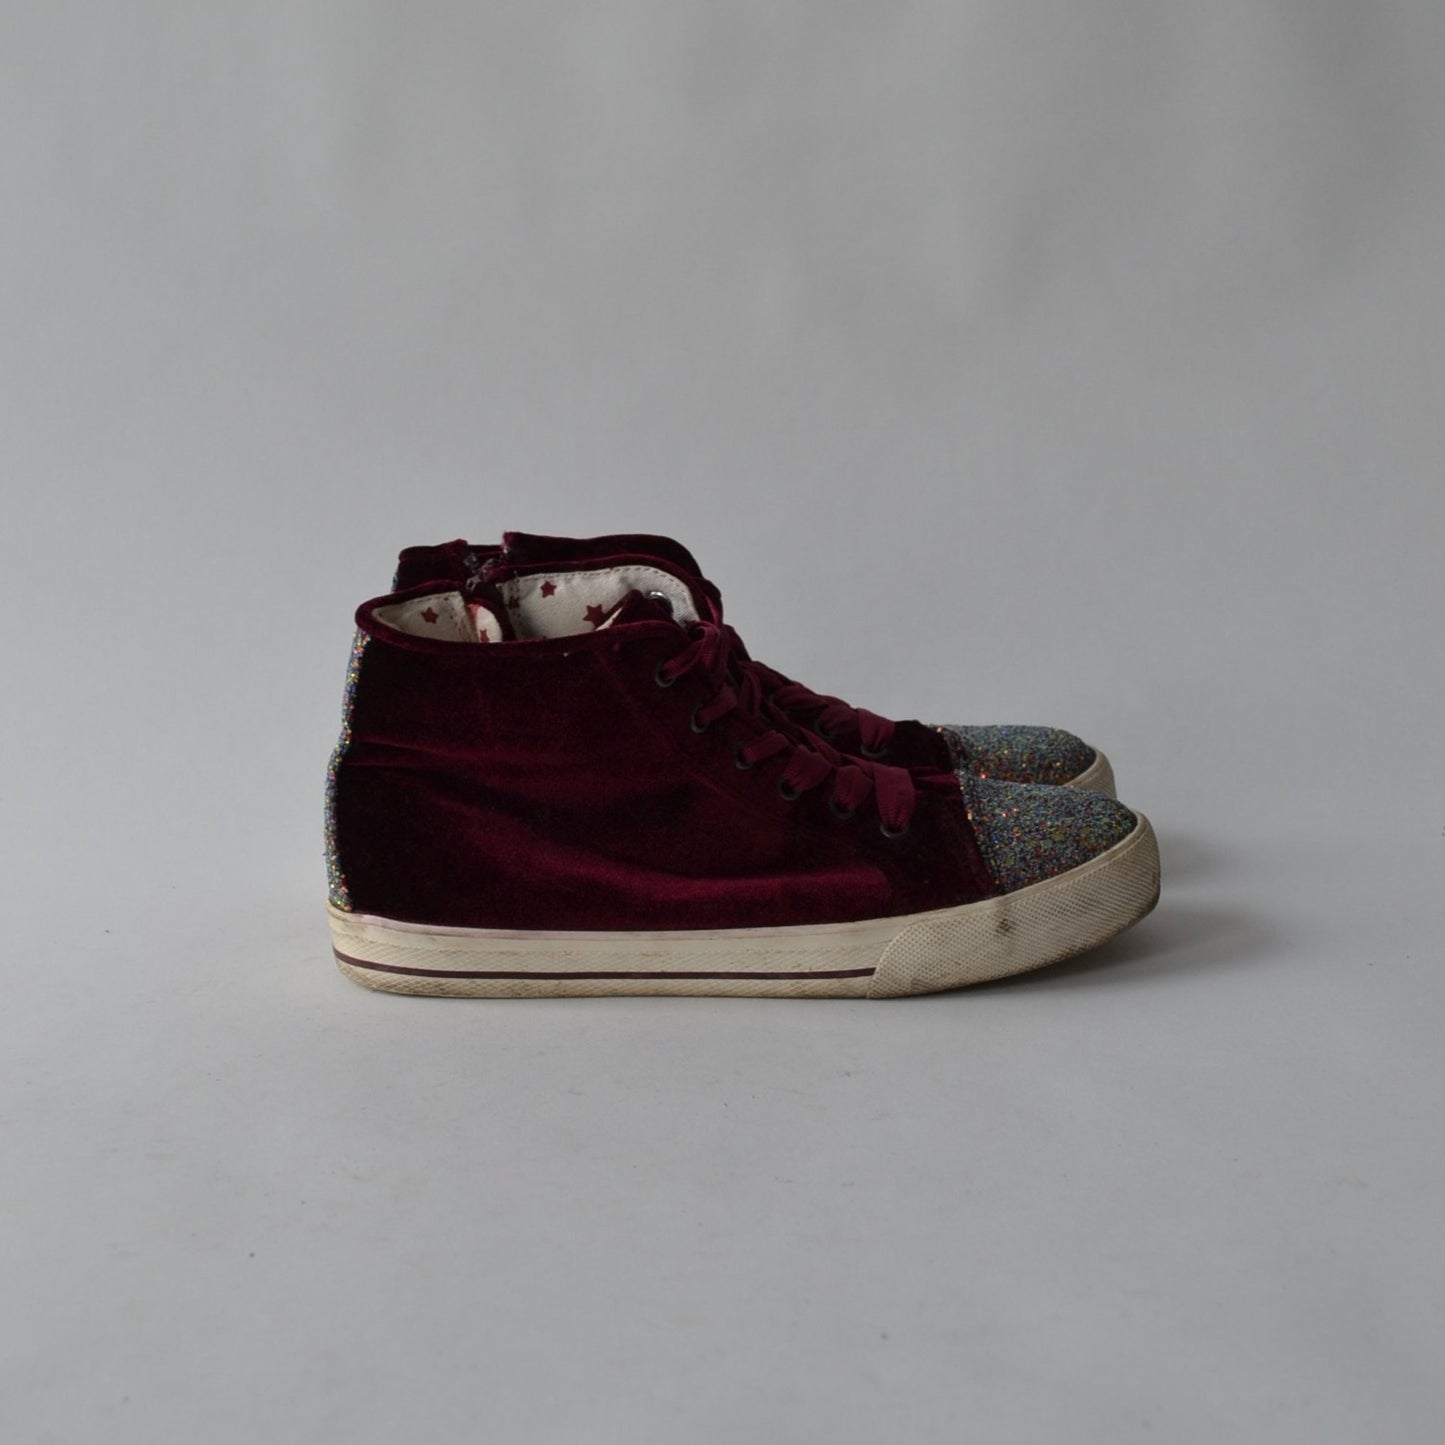 Trainers - M&S Sparkly Burgundy - Shoe Size 5